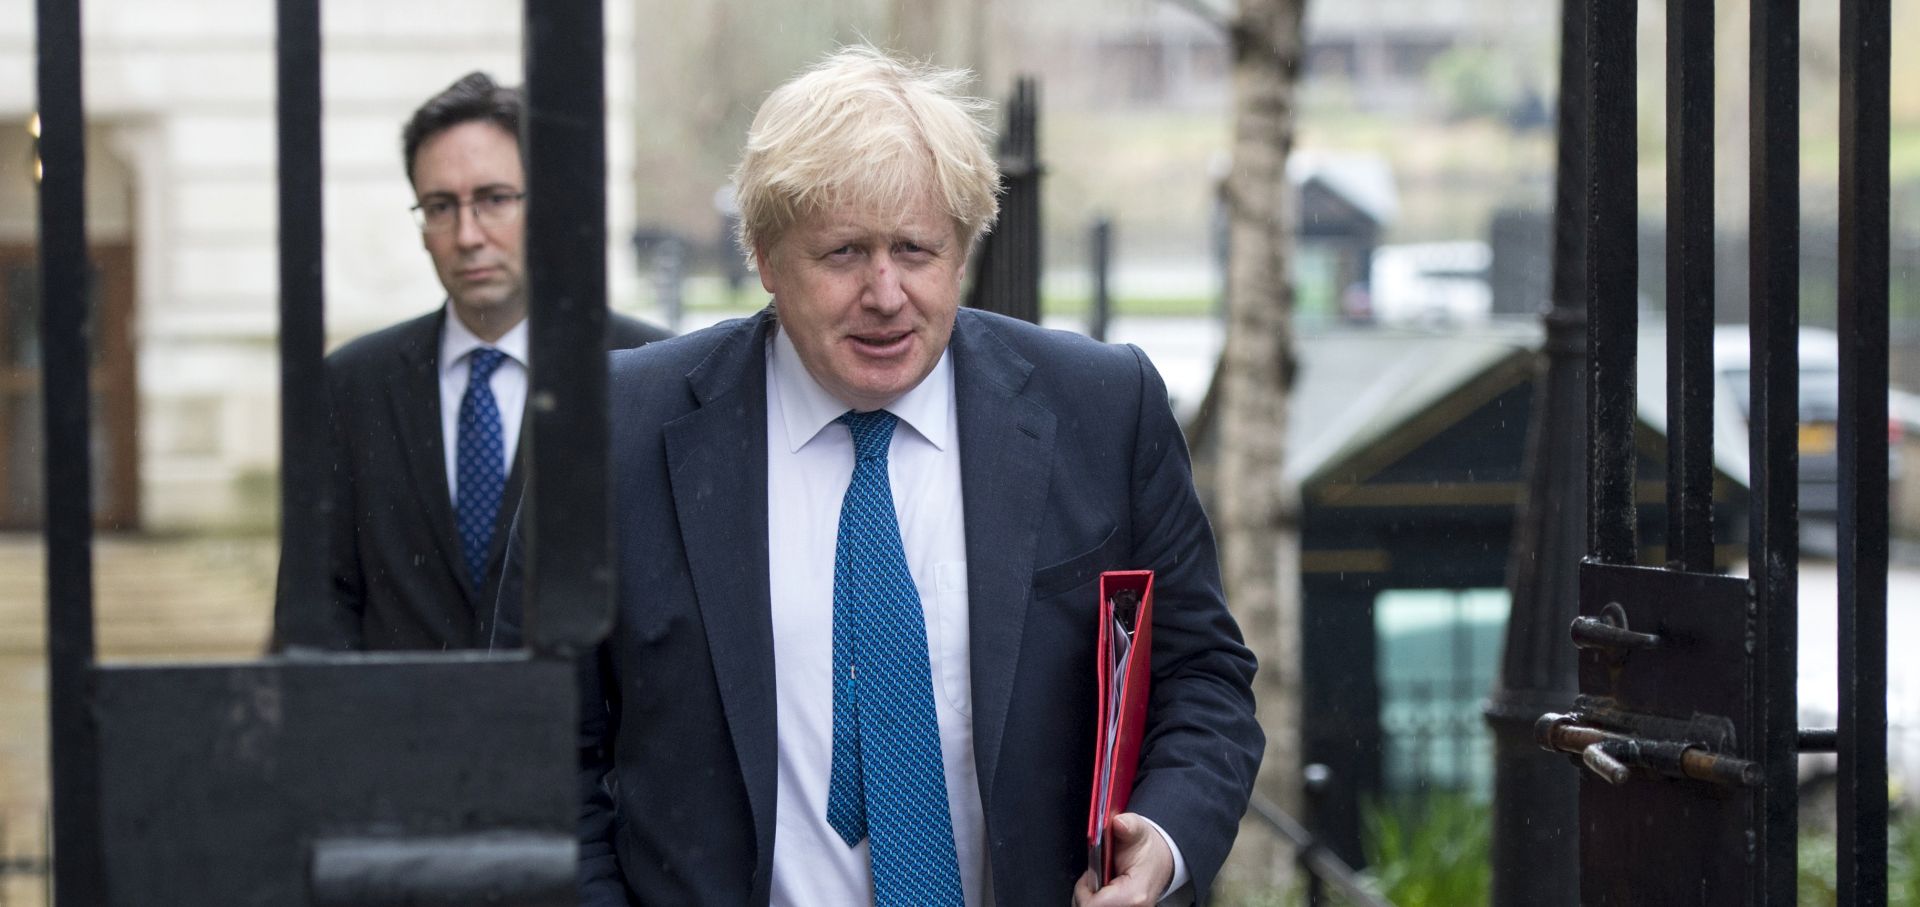 epa06598250 British Foreign Secretary Boris Johnson (R) arrives in Downing Street for a meeting with the National Security Council in Central London, Britain, 12 March 2018. British Prime Minister Theresa May called a meeting of the National Security Council to discuss poisoning of former Russsian spy Sergei Skripal and his daughter in Salisbury.  EPA/WILL OLIVER